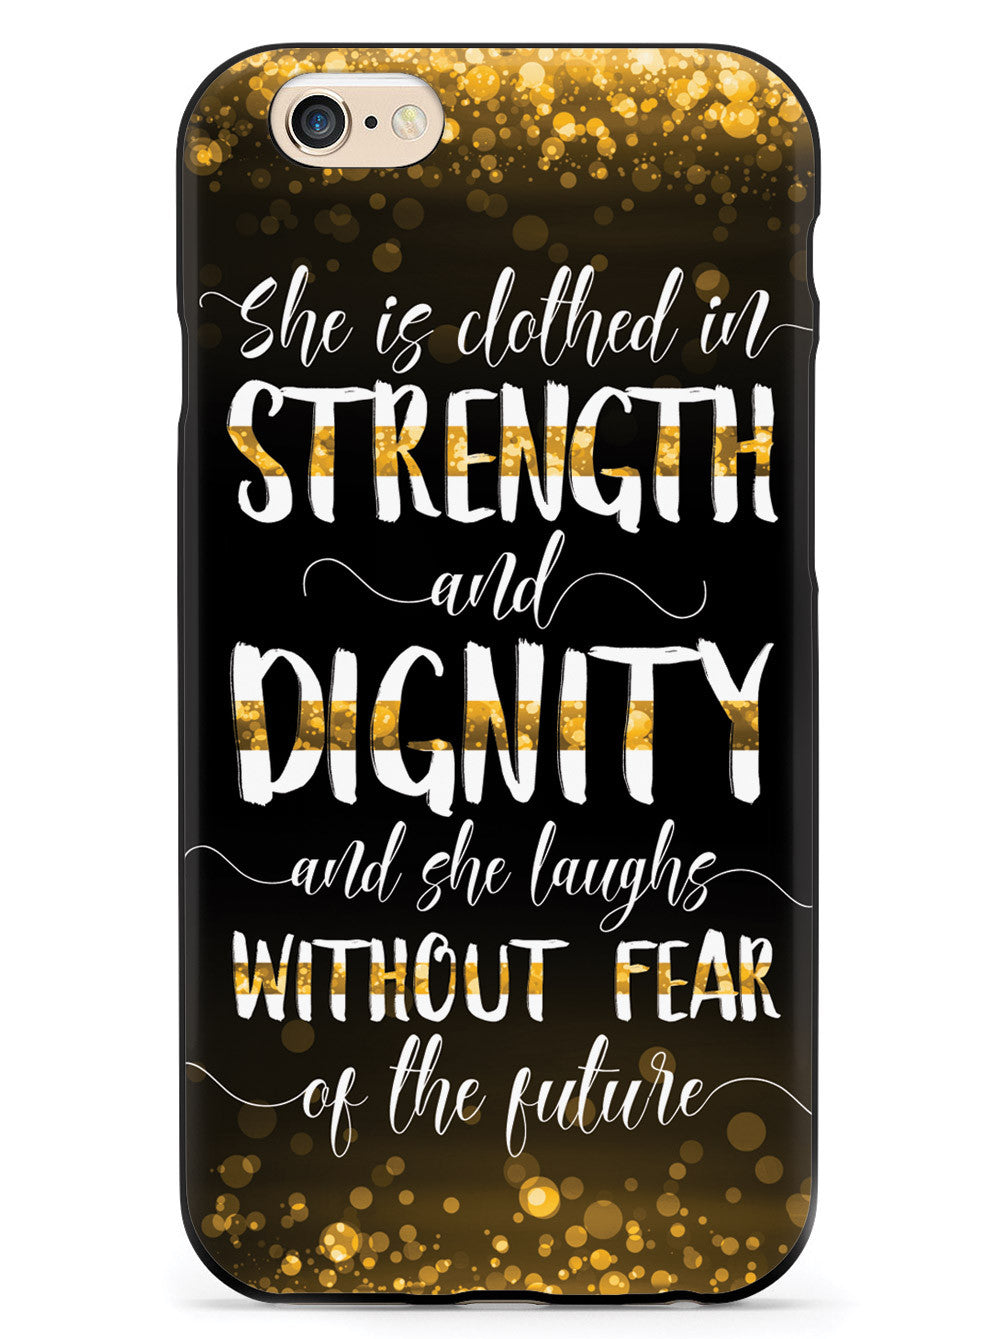 She Is Clothed in Strength and Dignity - Thin Gold Line Case